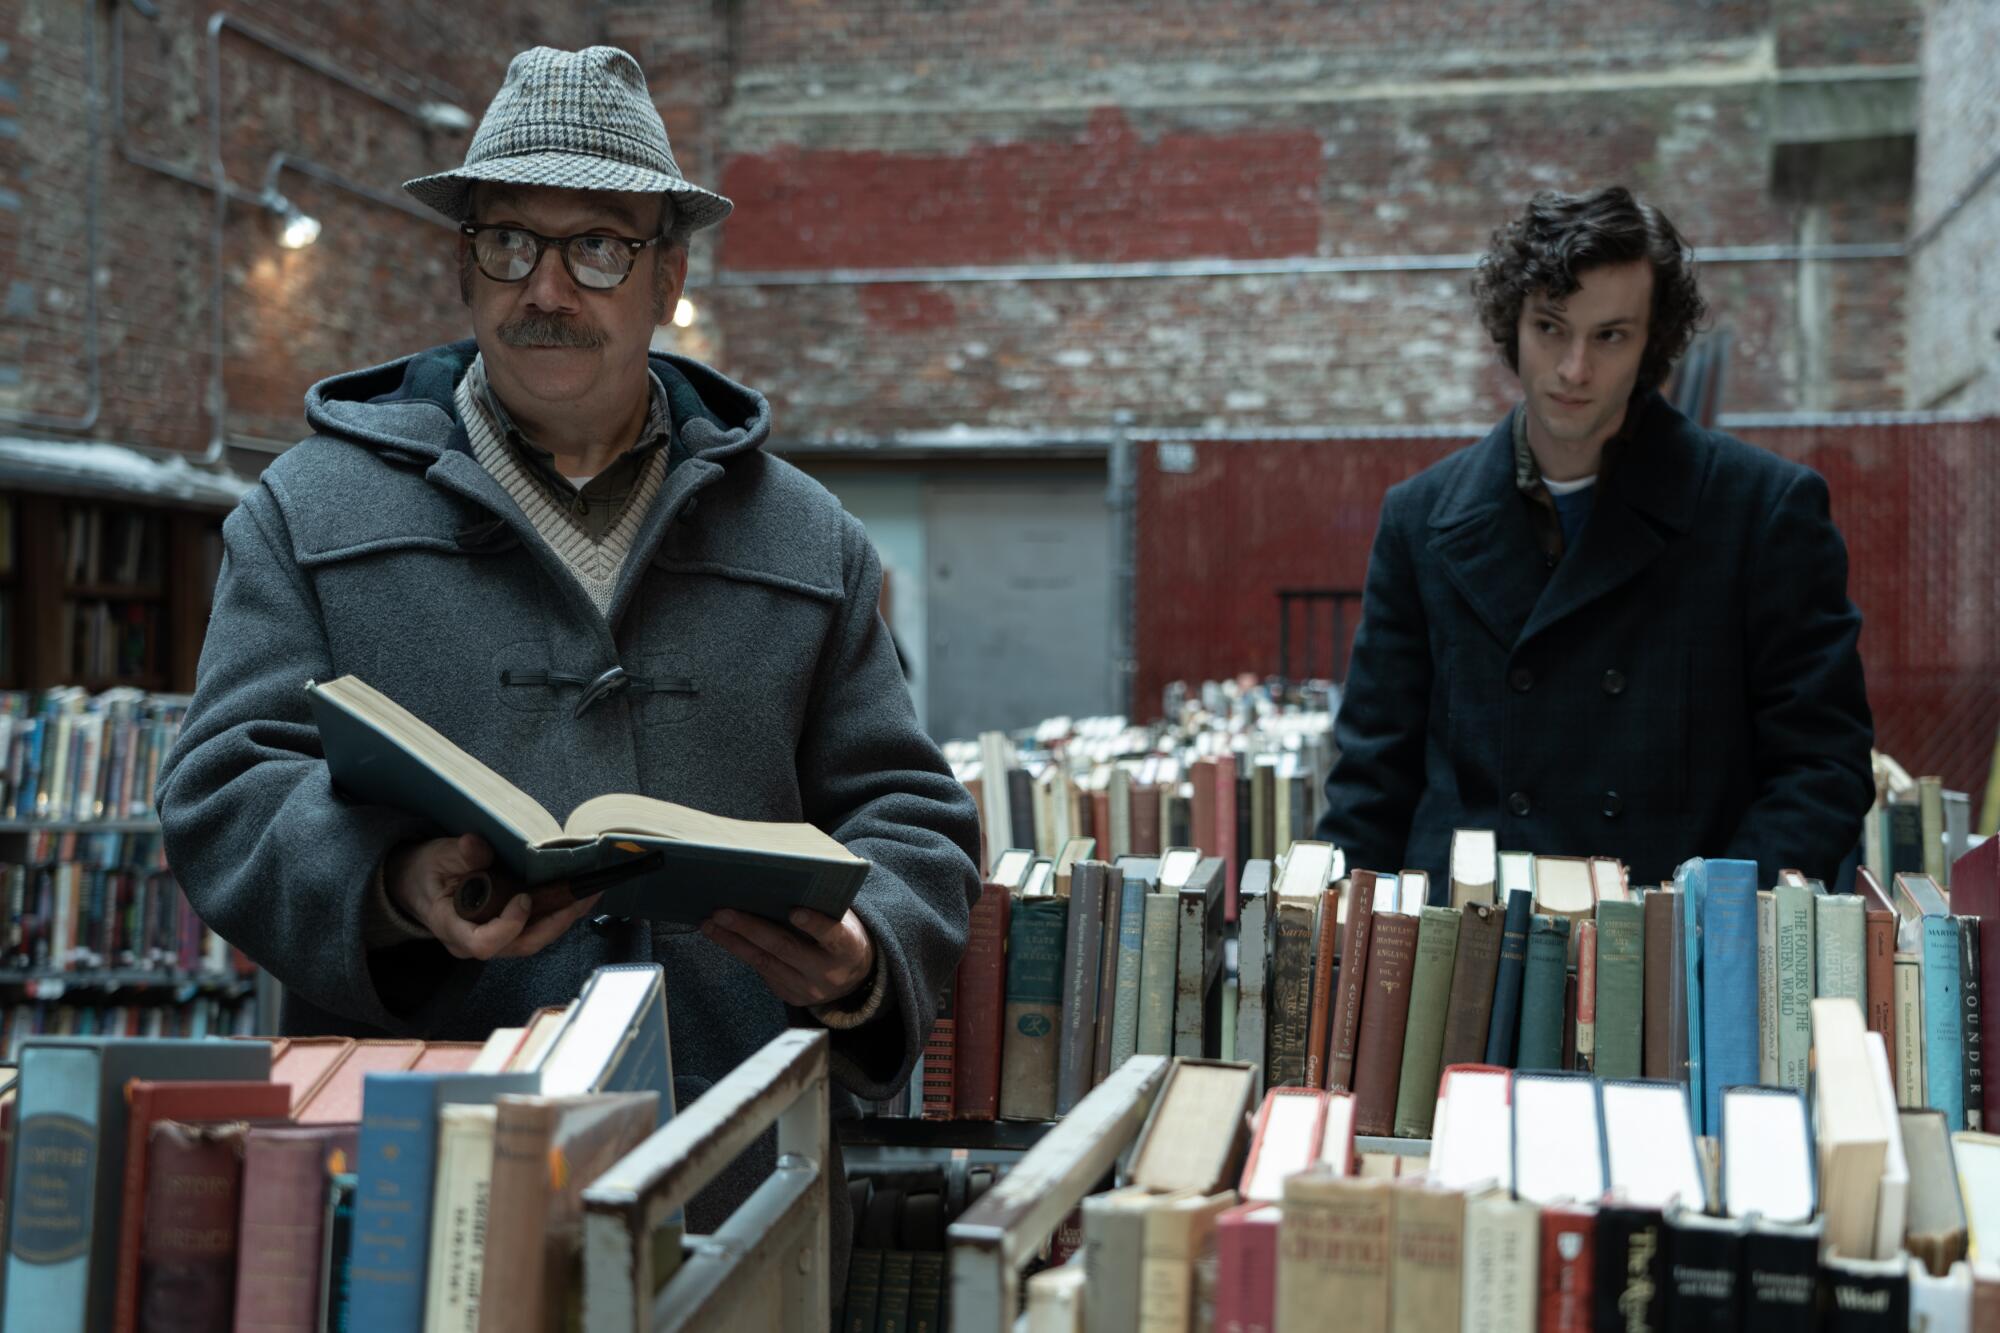 Two men browse in a bookstore.